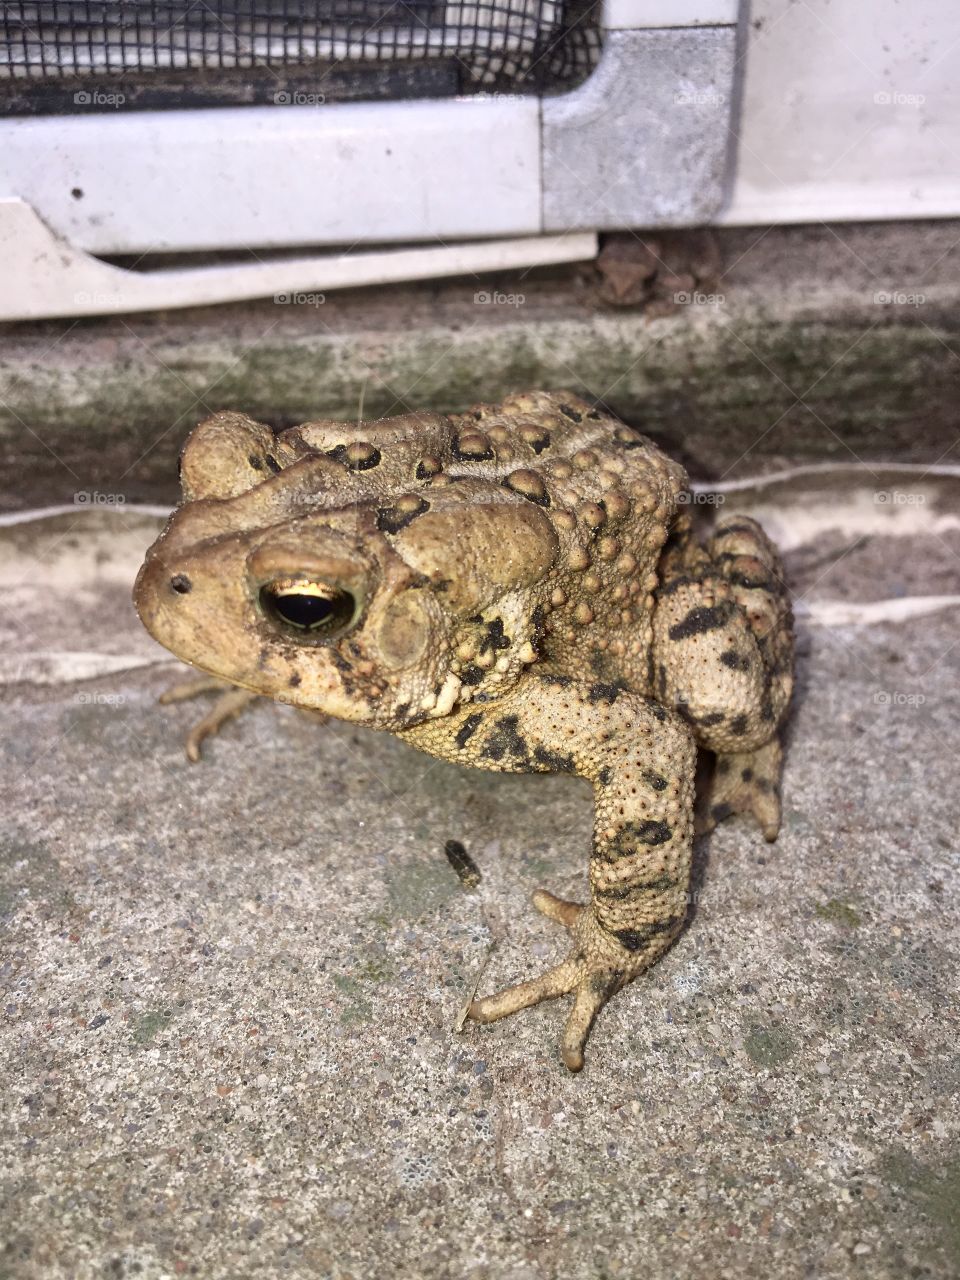 A large toad living in my window well. The window well collects moisture making it a great home for a toad. Taken at my rural house in Ontario, Canada.